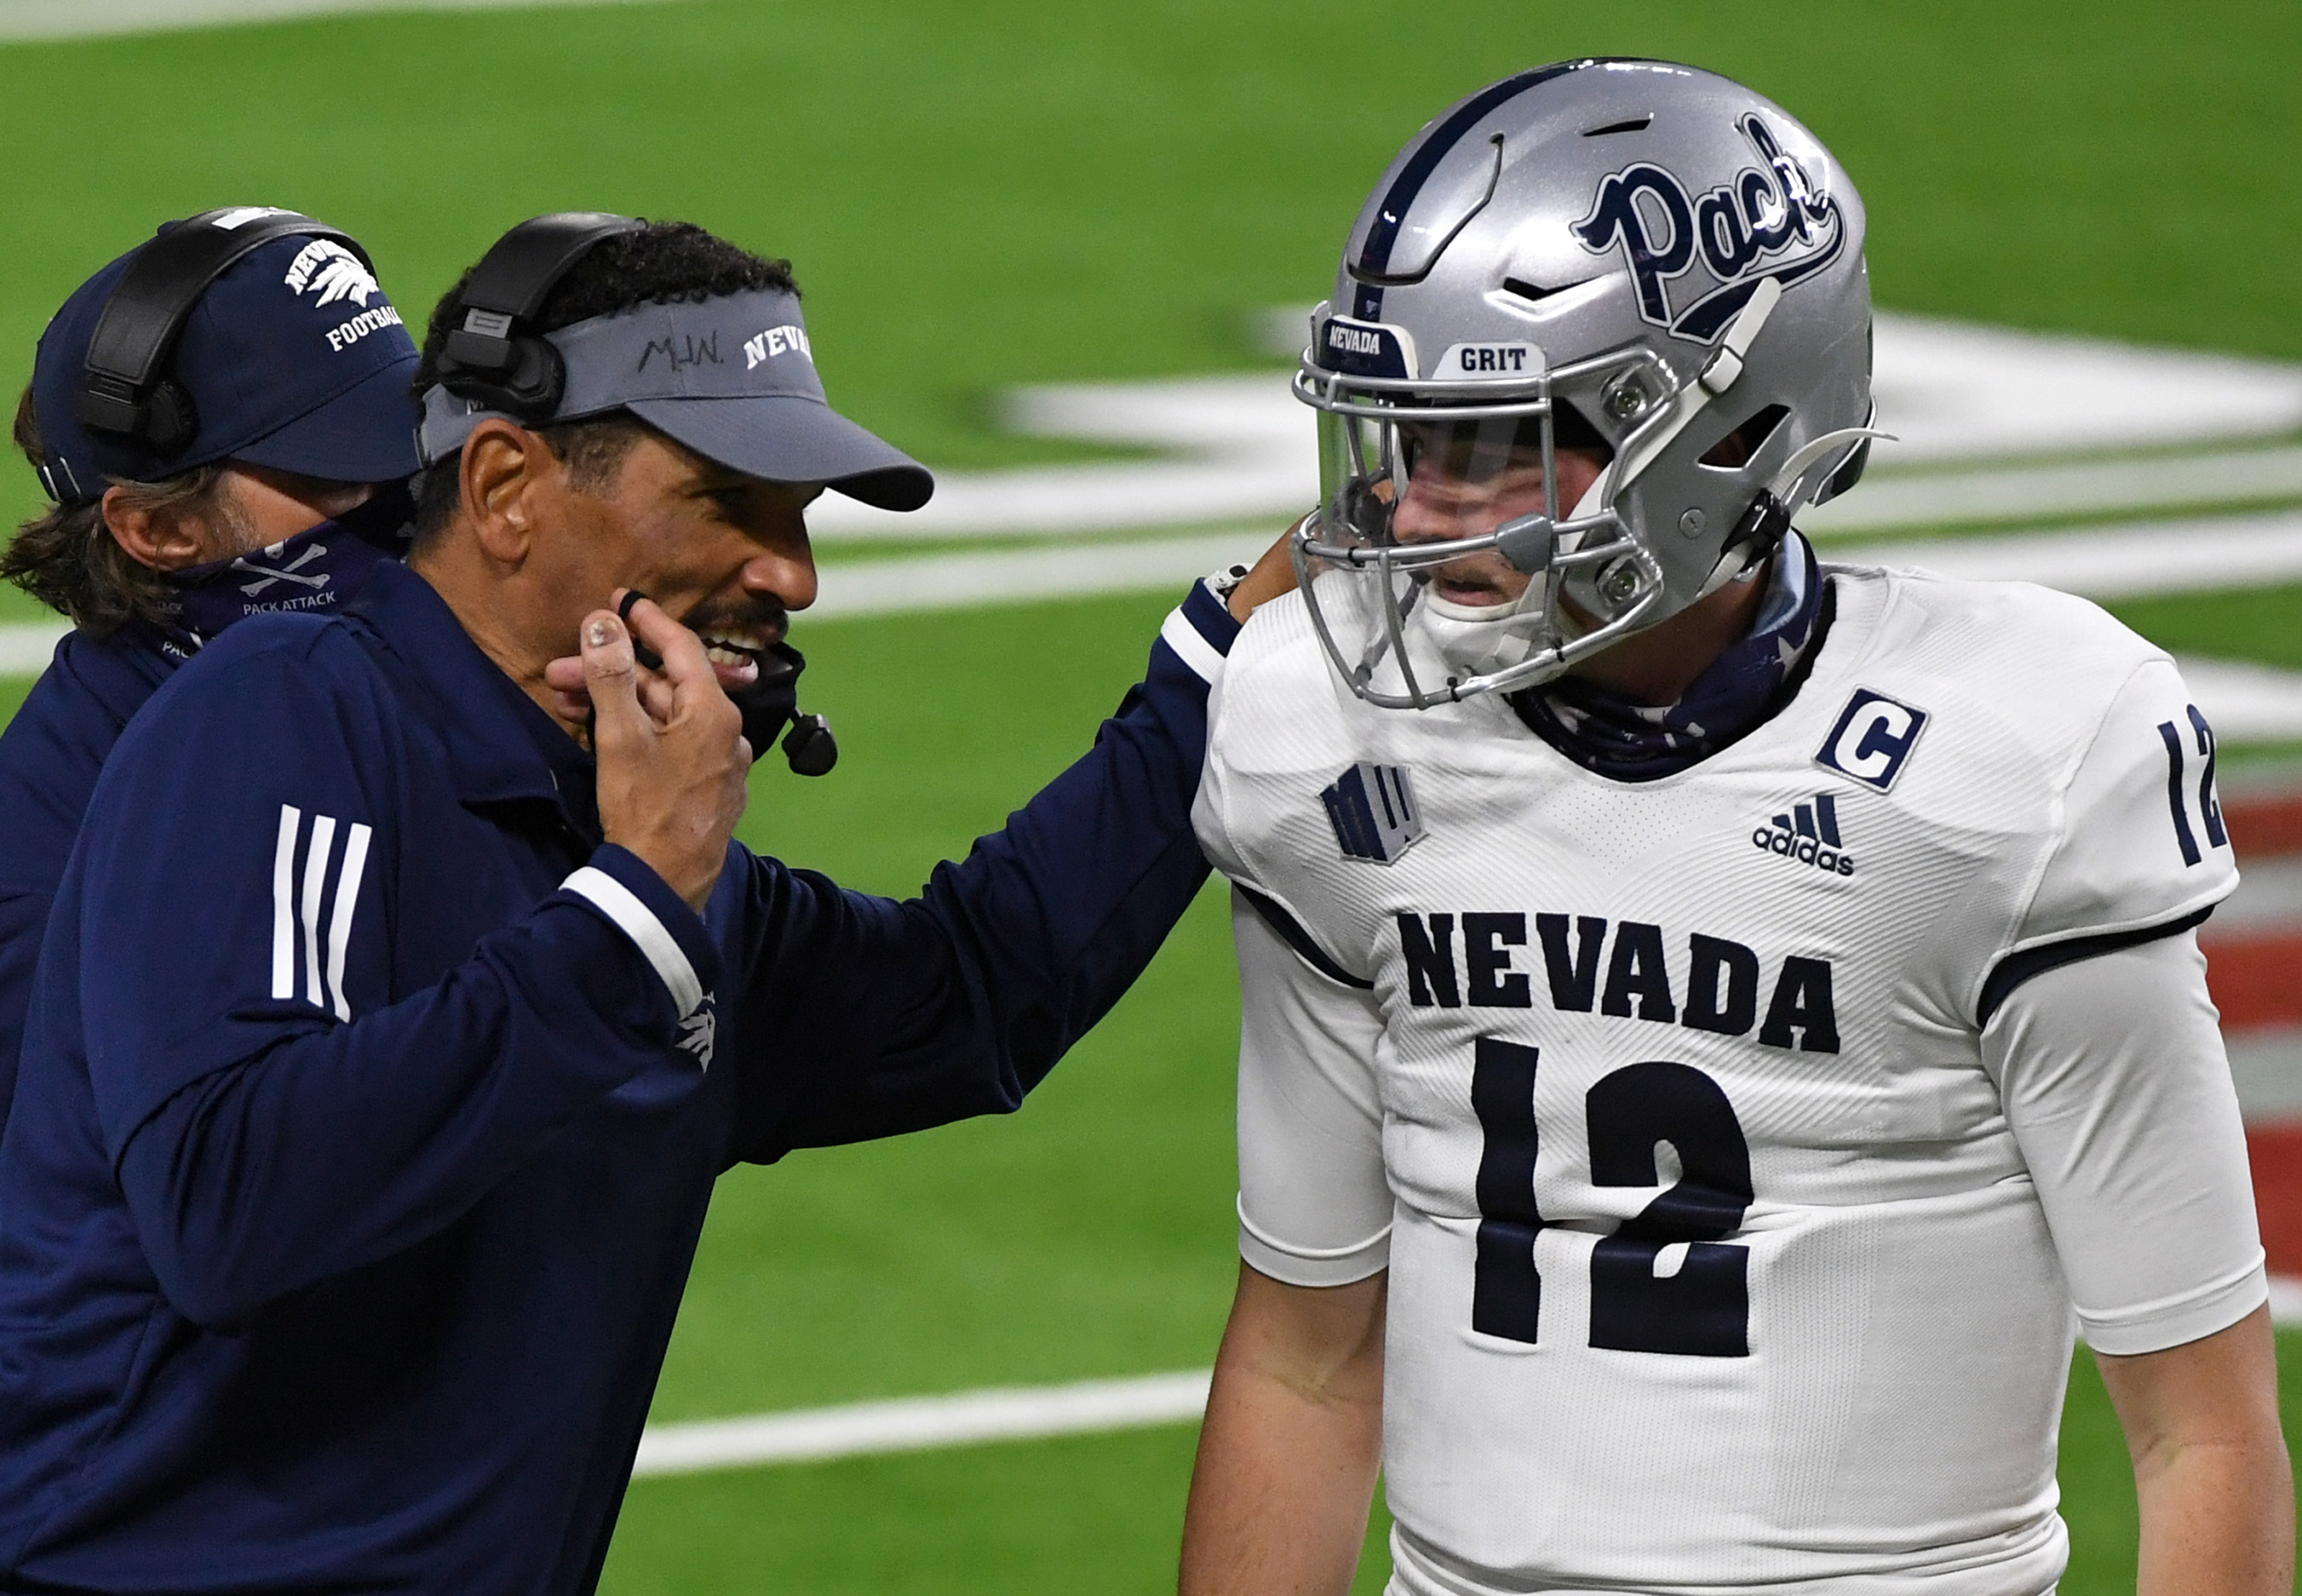 Nevada football: Carson Strong could lead Wolf Pack to MWC title